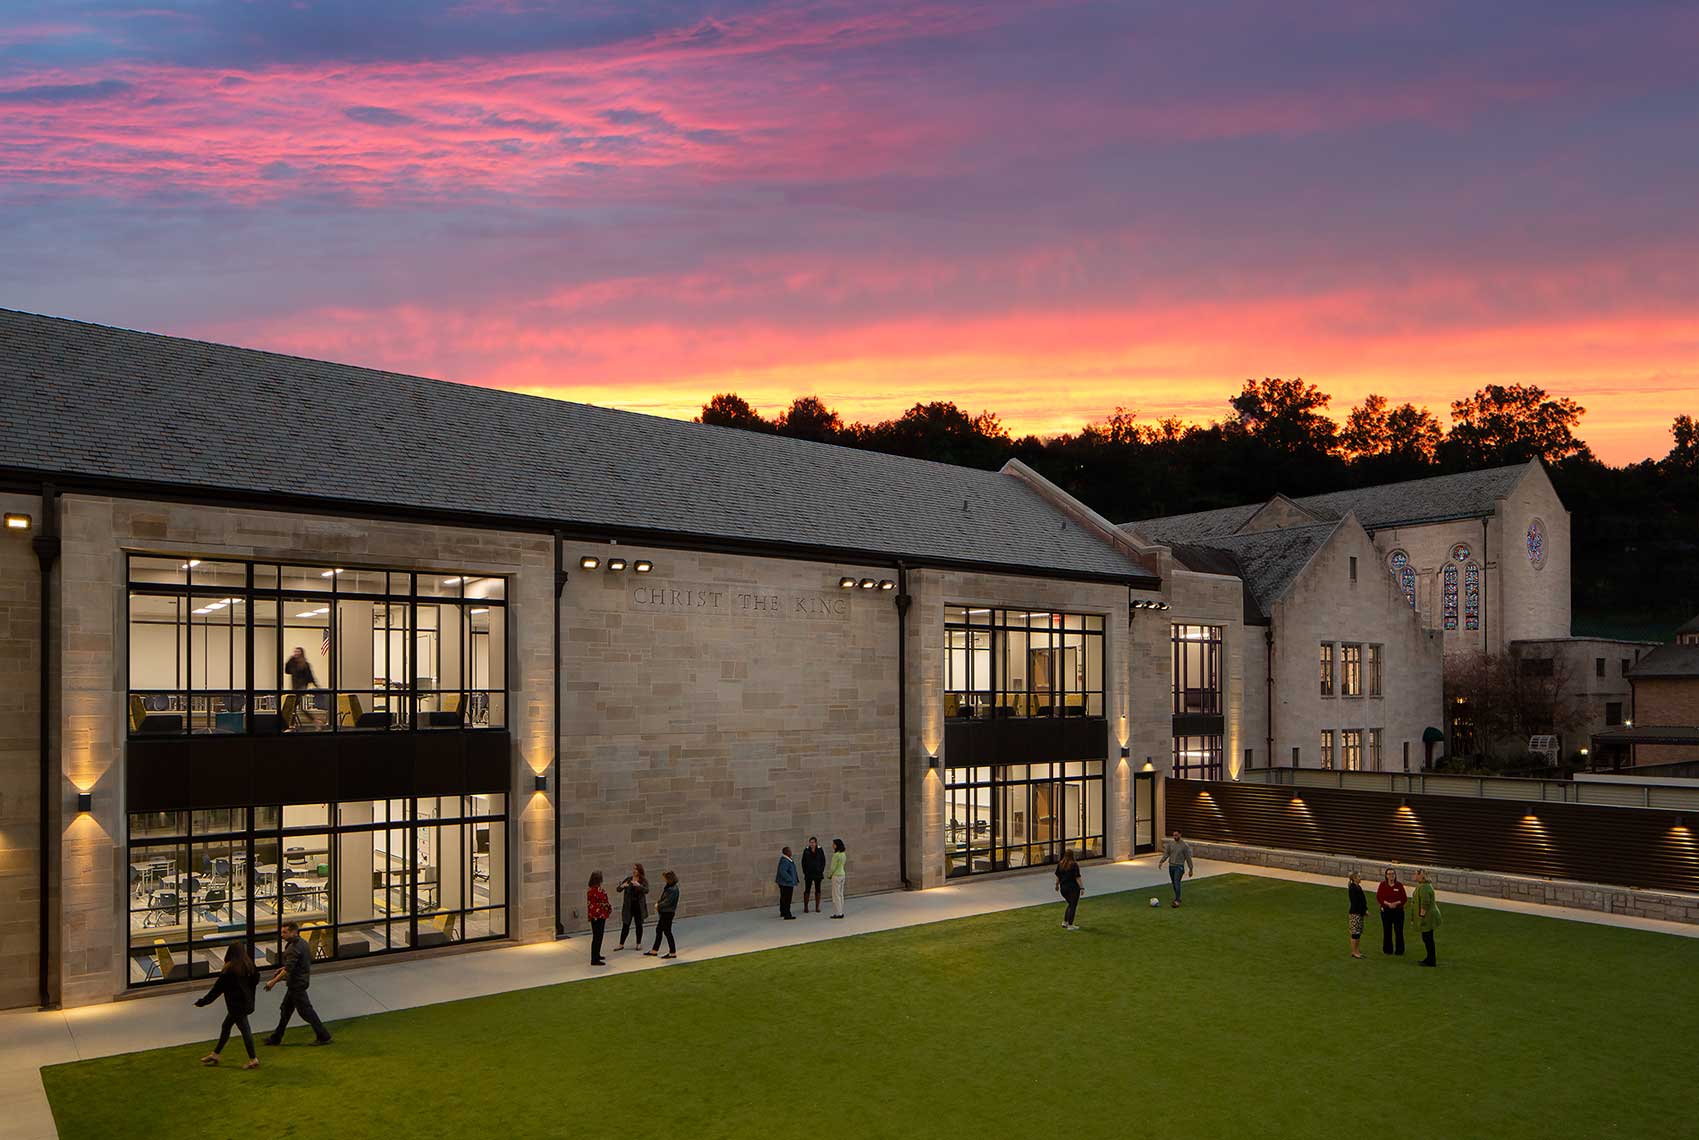 A dramatic sky enhances the appeal of this image of CTK Hyland Center Courtyard